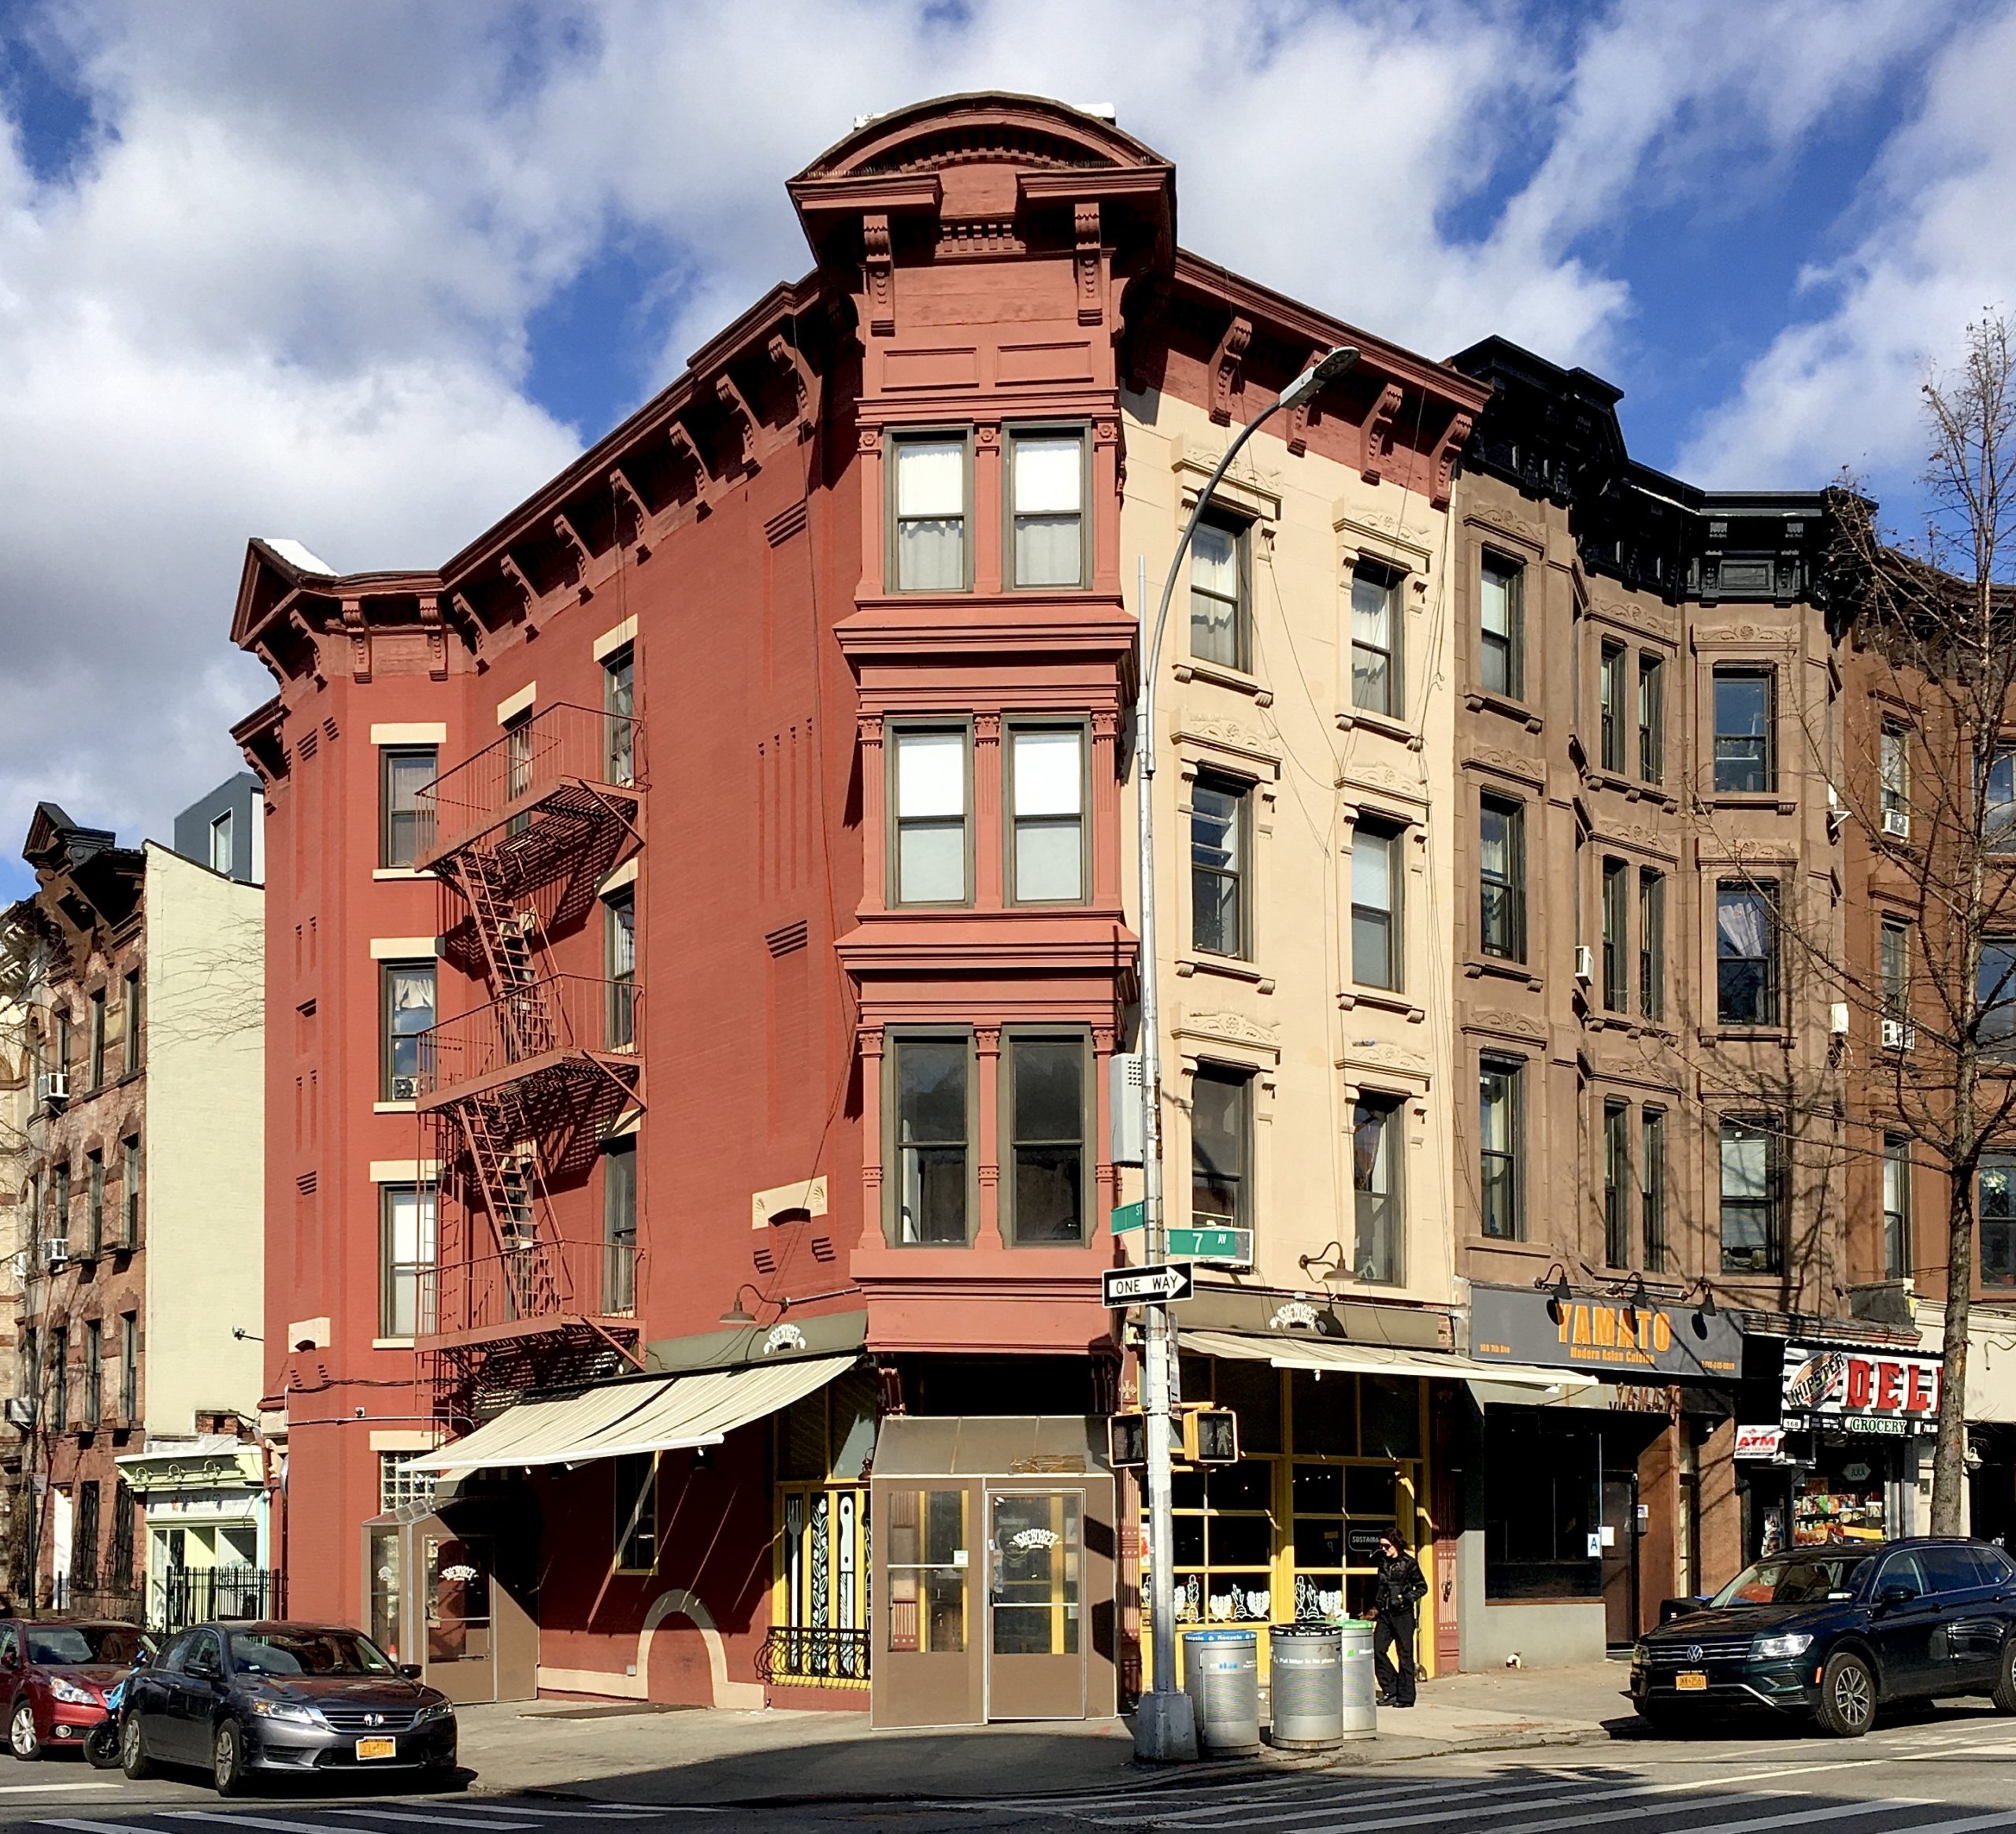 This flats building at 170 Seventh Ave. is so picturesque. Photo: Lore Croghan/Brooklyn Eagle